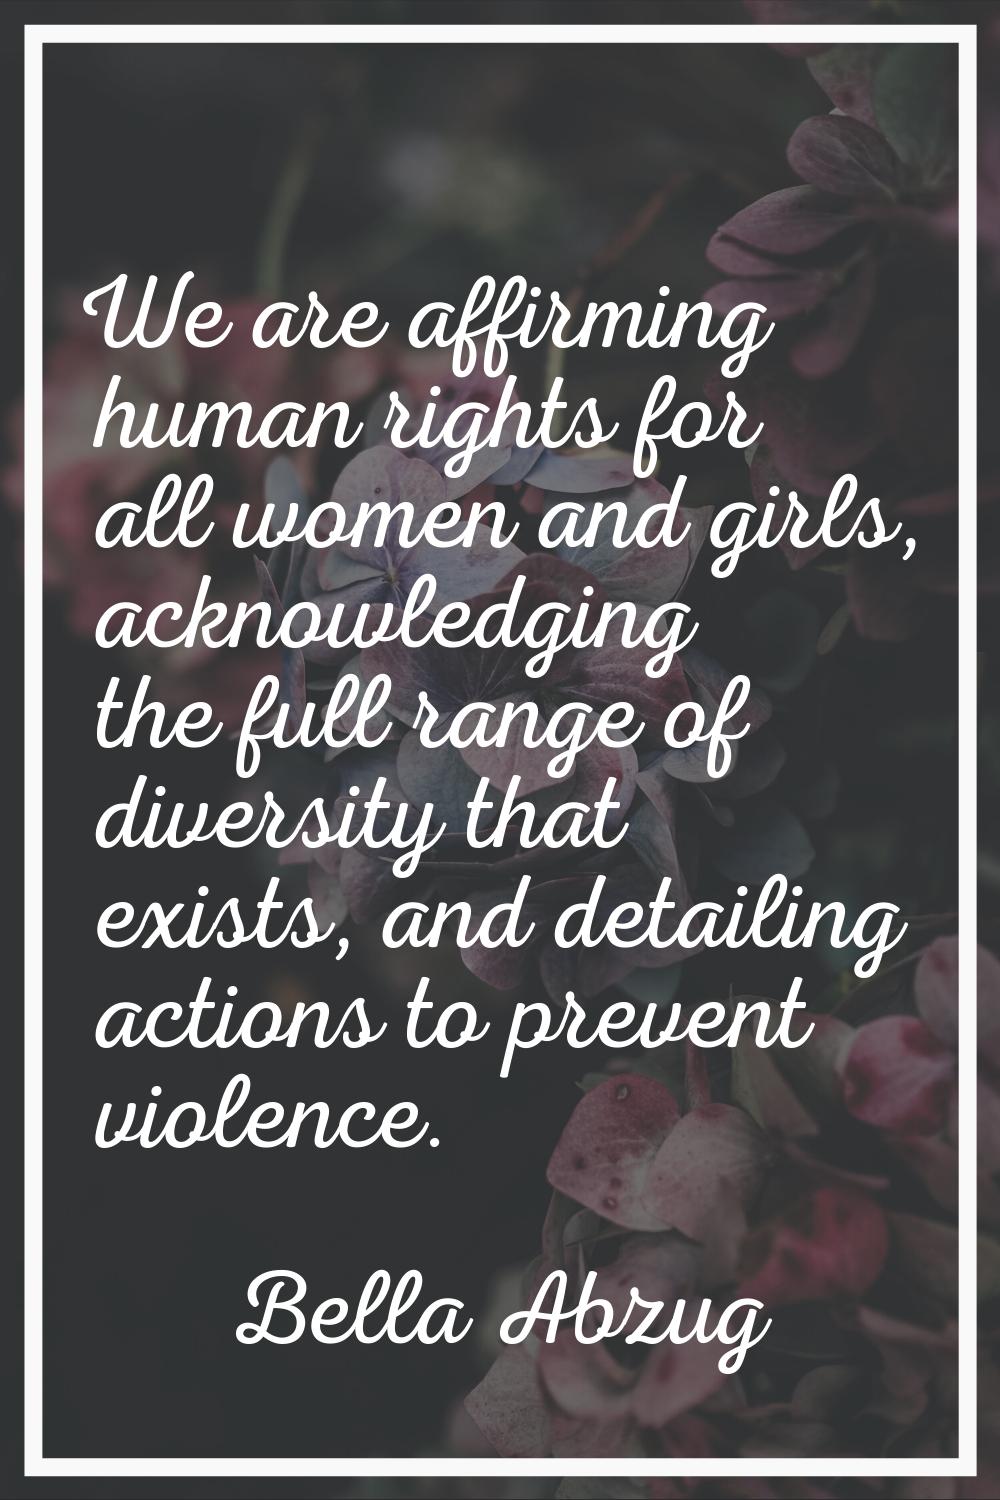 We are affirming human rights for all women and girls, acknowledging the full range of diversity th